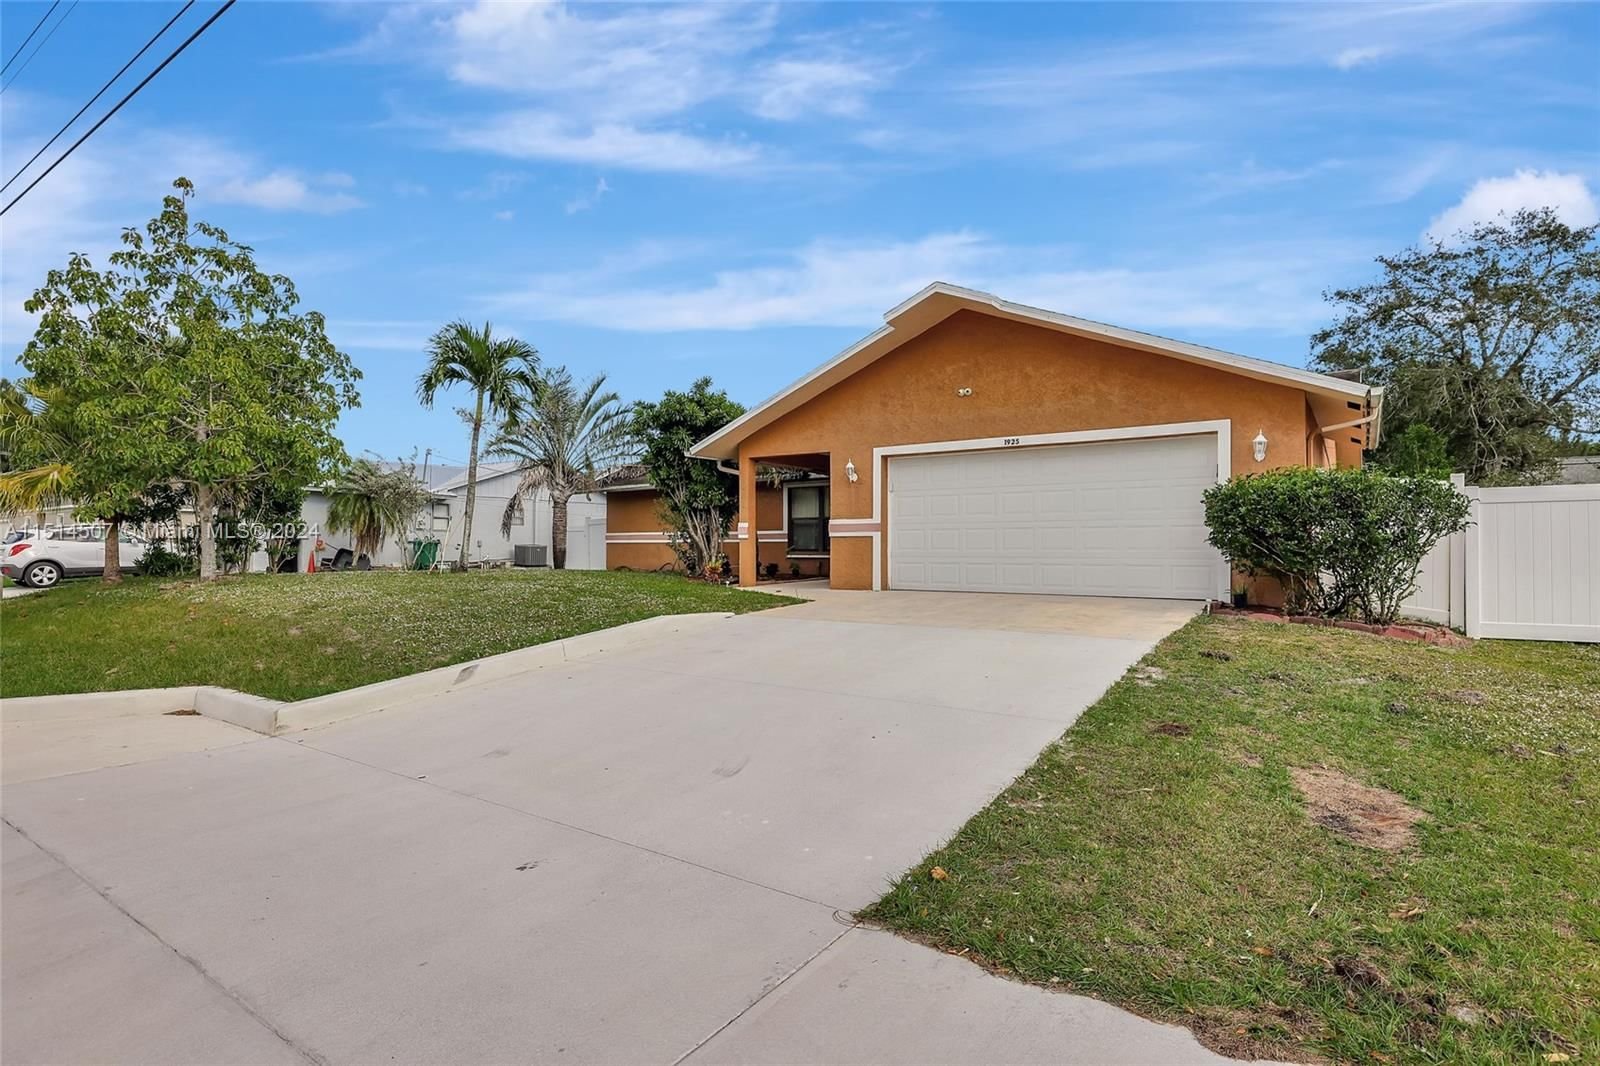 Real estate property located at 1925 Floresta Drive, St Lucie County, PORT ST LUCIE SECTION 10, Port St. Lucie, FL